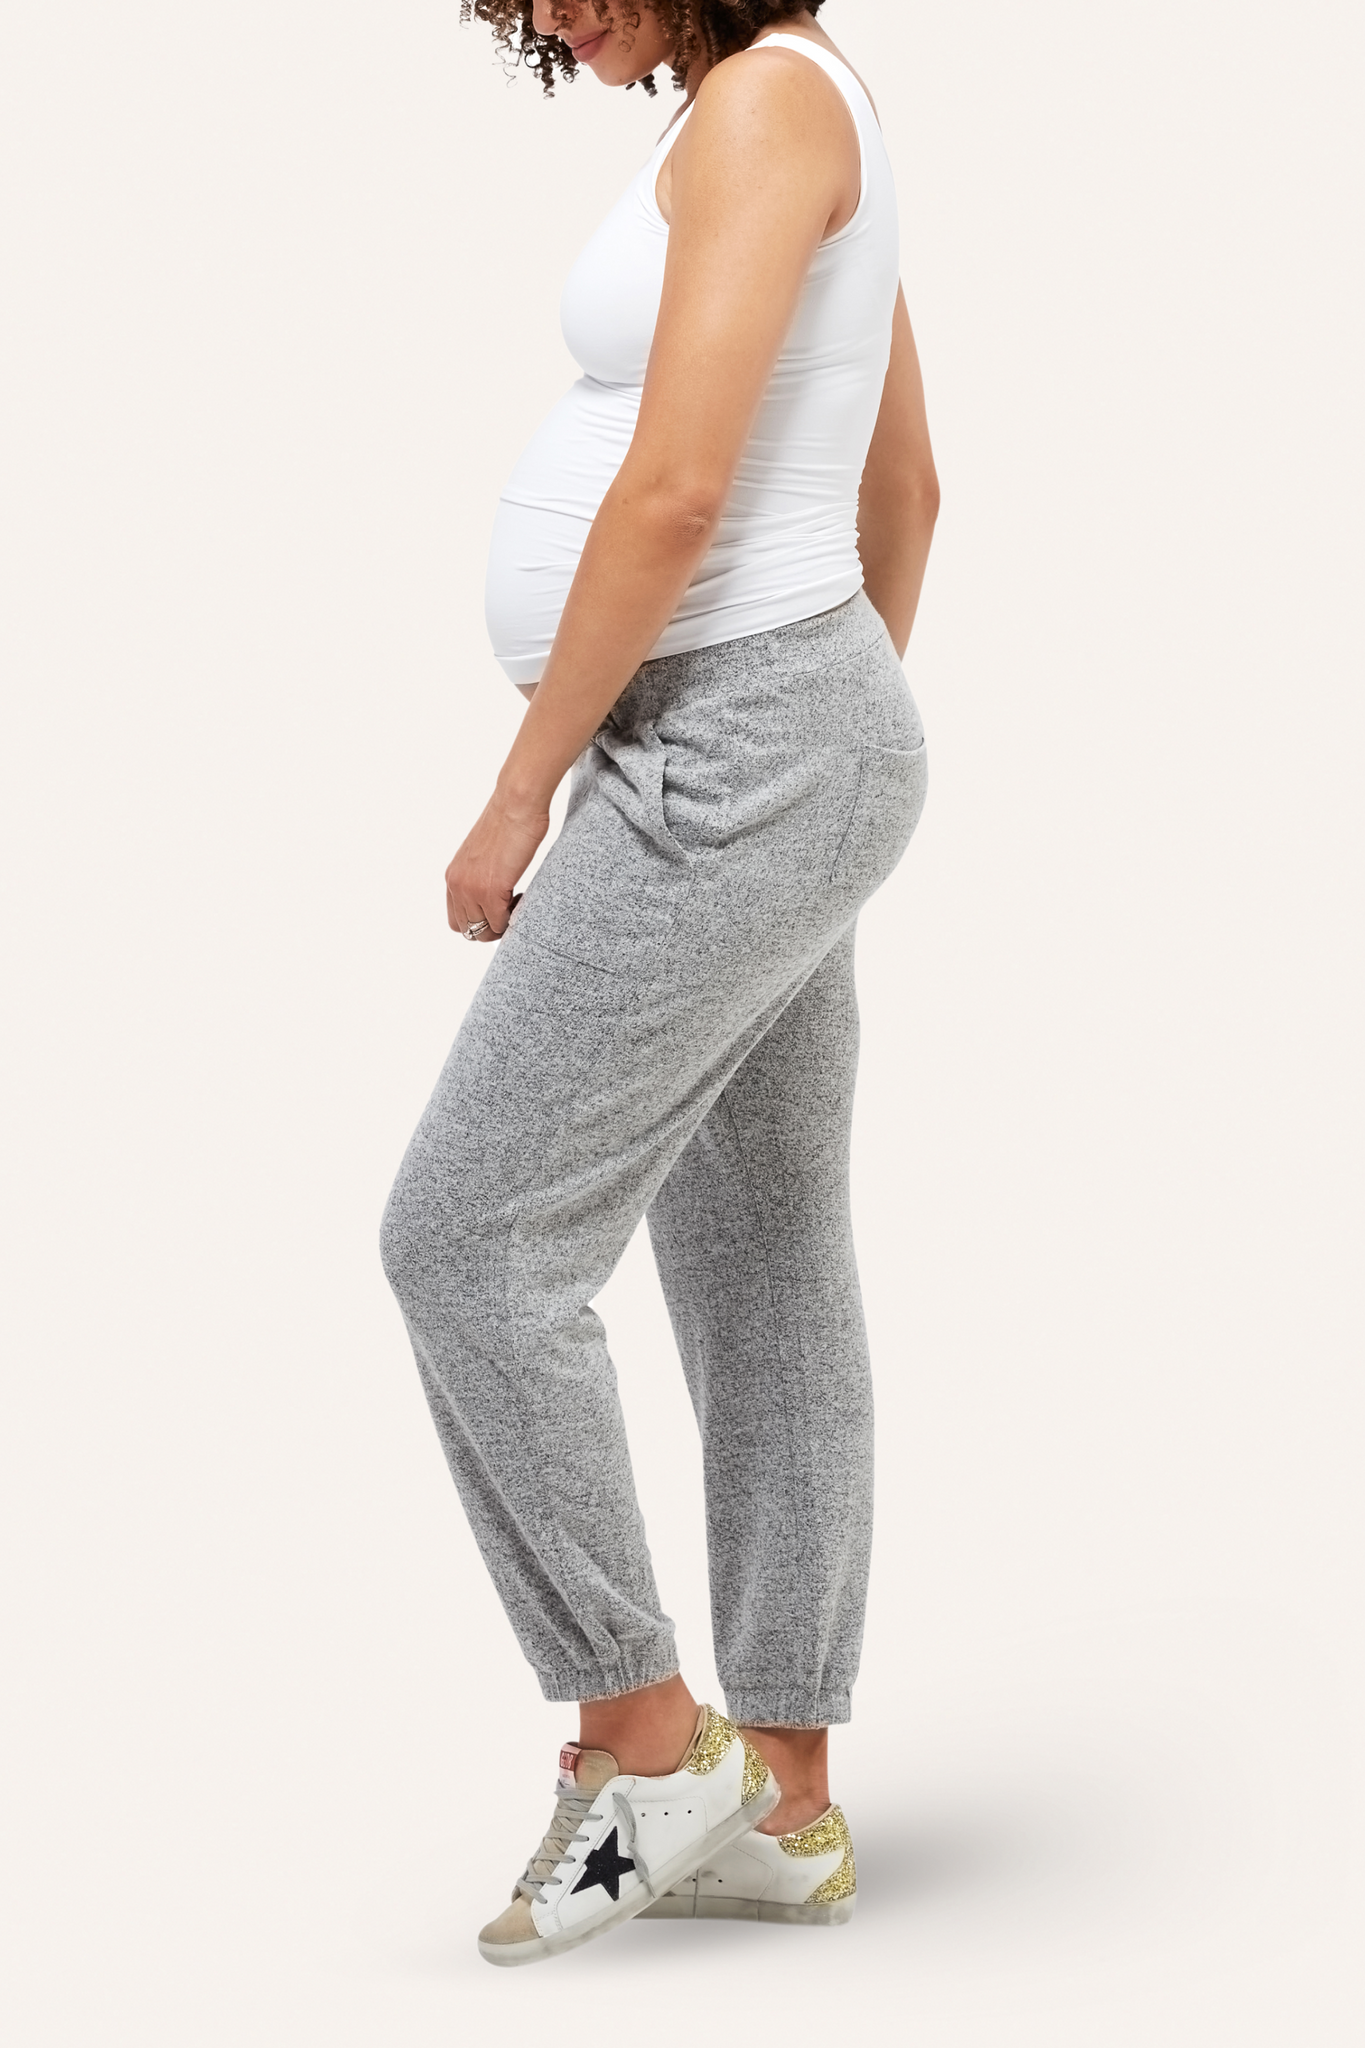 fitglam Women's Maternity Pants Over Belly Lounge Pajamas Clothes Pregnancy  Must Haves Joggers with Pockets 2 Pack at  Women's Clothing store